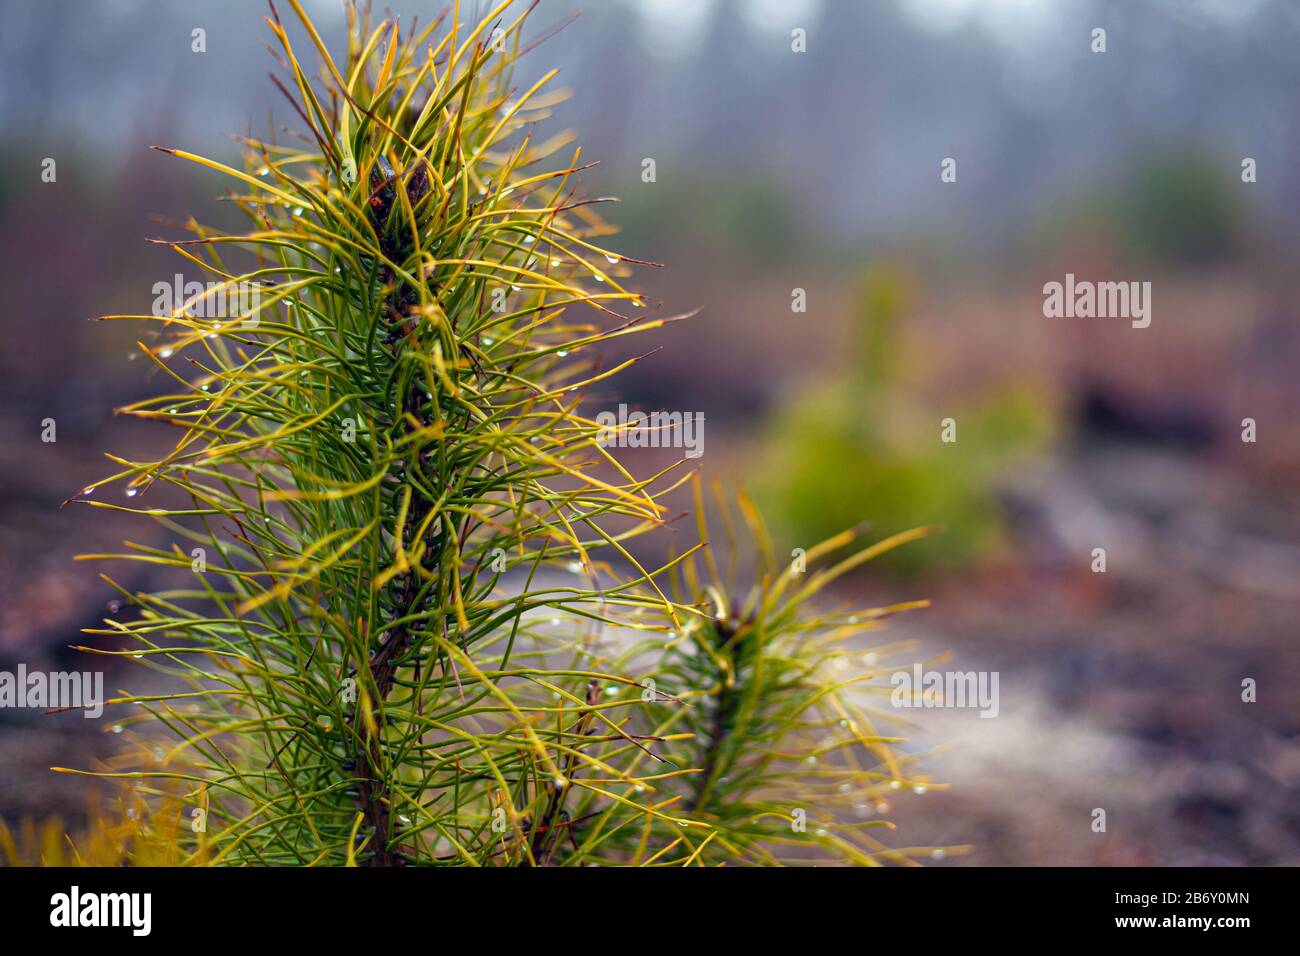 sprig of coniferous evergreen pine on blurred forest background with dew drops on needles. close-up. Stock Photo